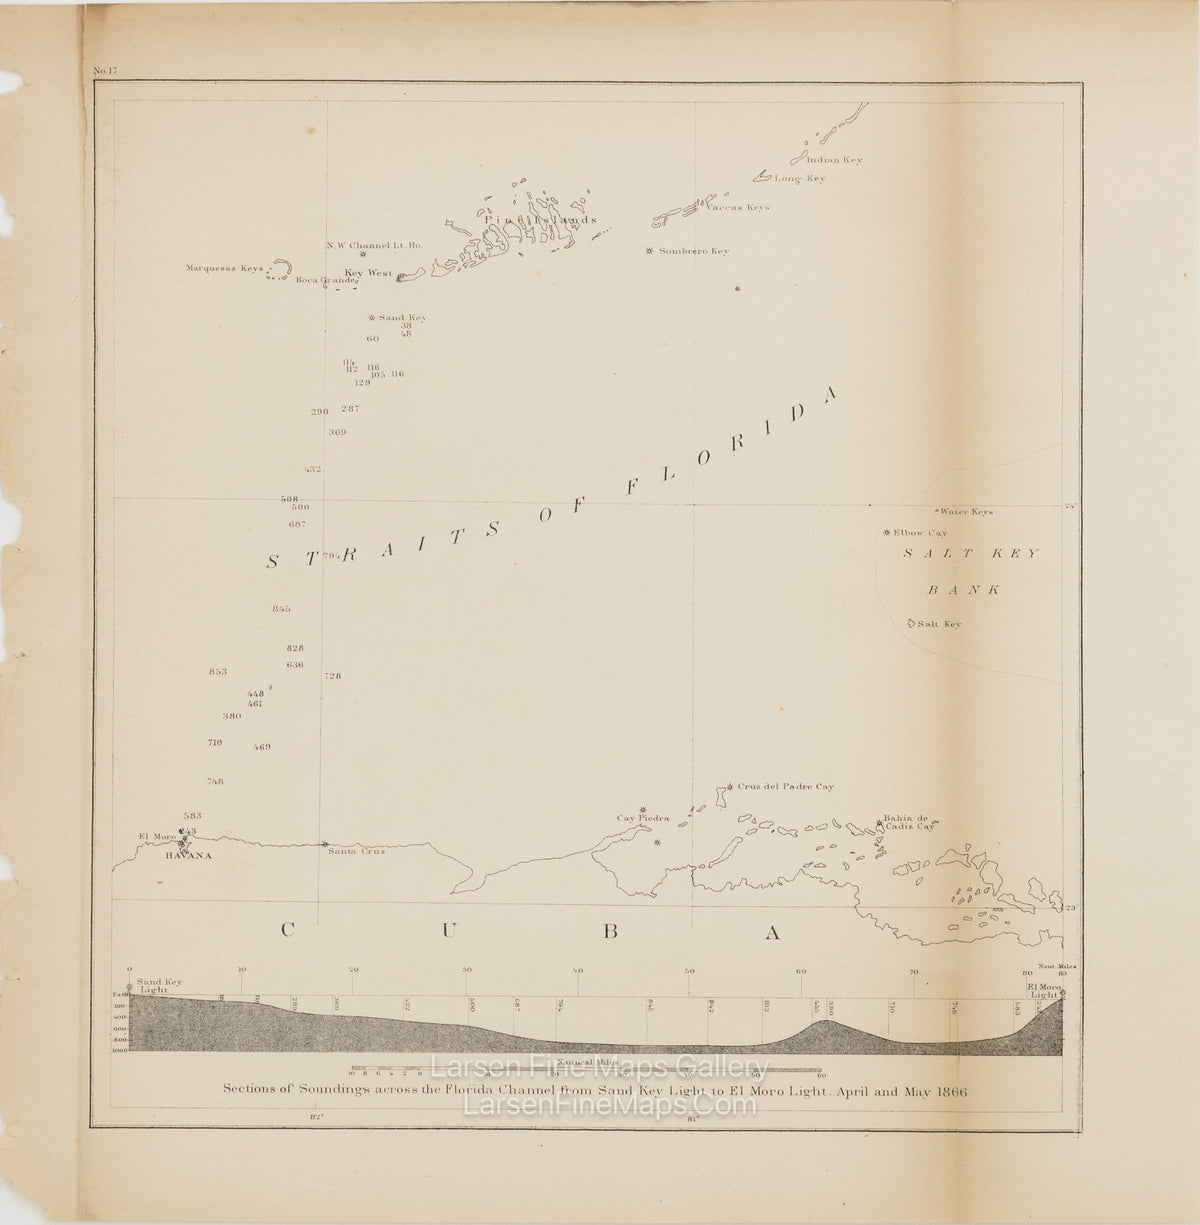 Straits of Florida. Sections of Soundings across the Florida Channel from Sand Key Light to El Moro Light. April and May 1866